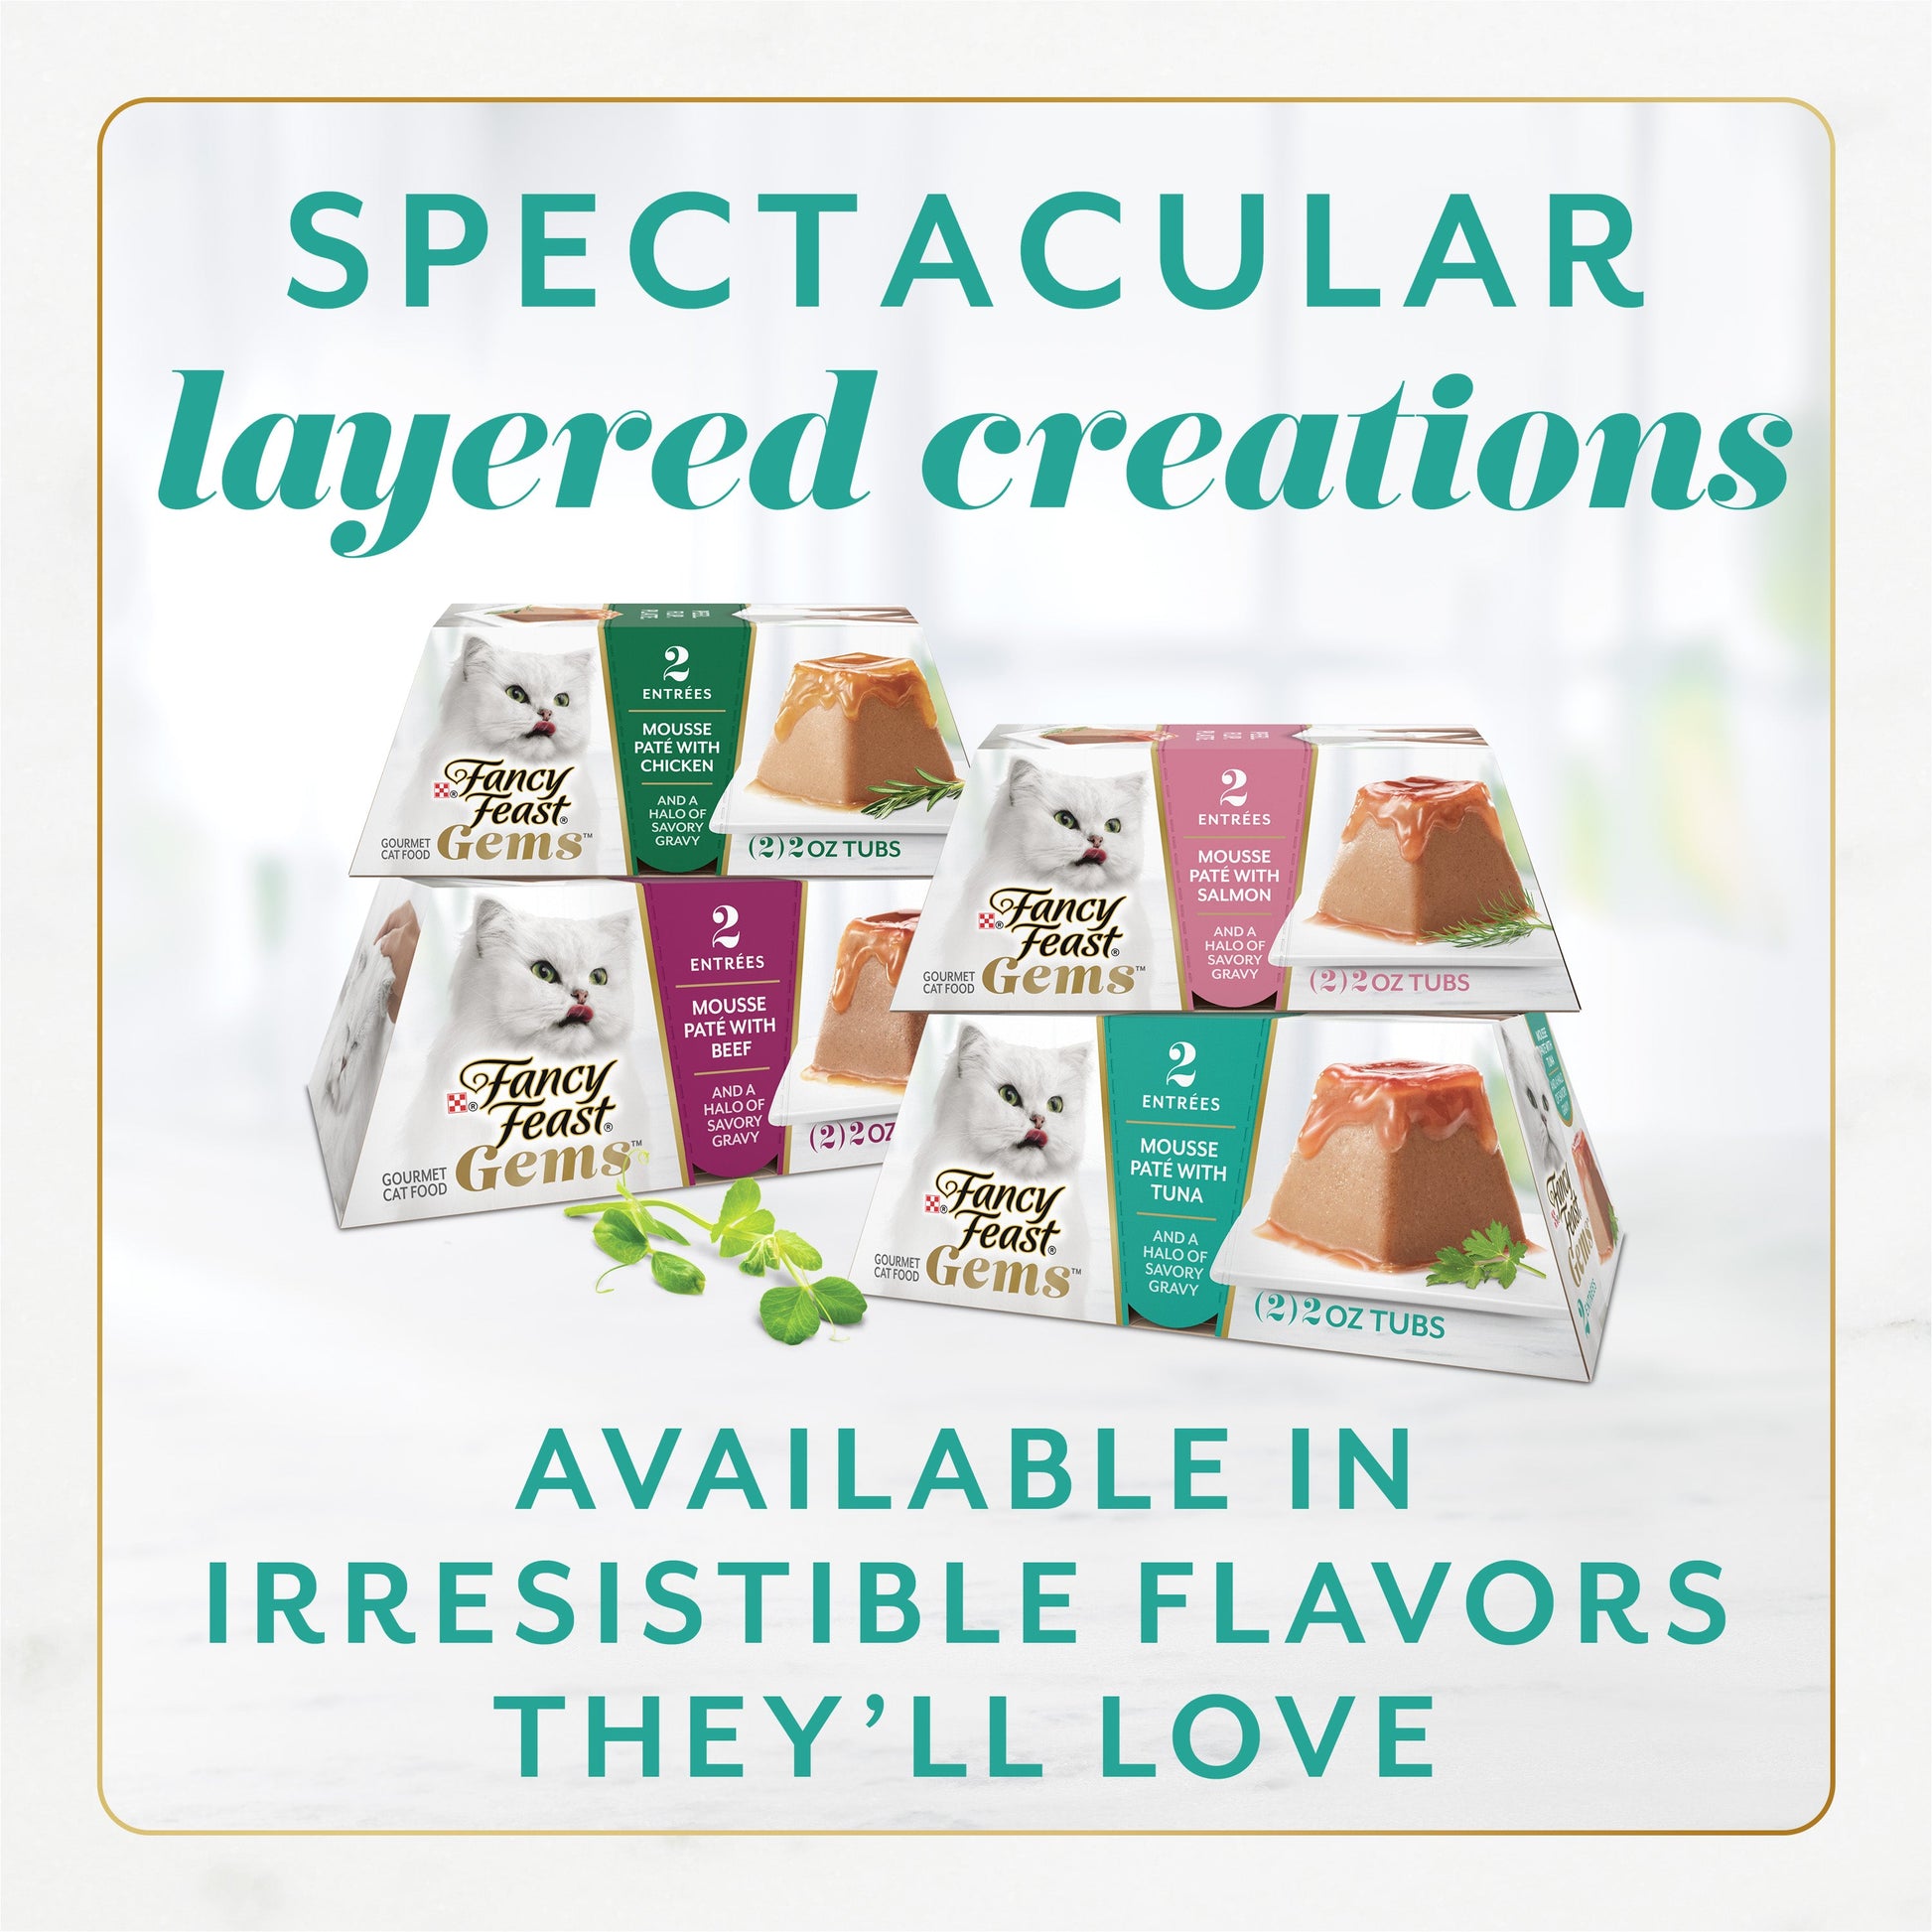 Spectacular layered creations, available in irresistible flavors they'll love